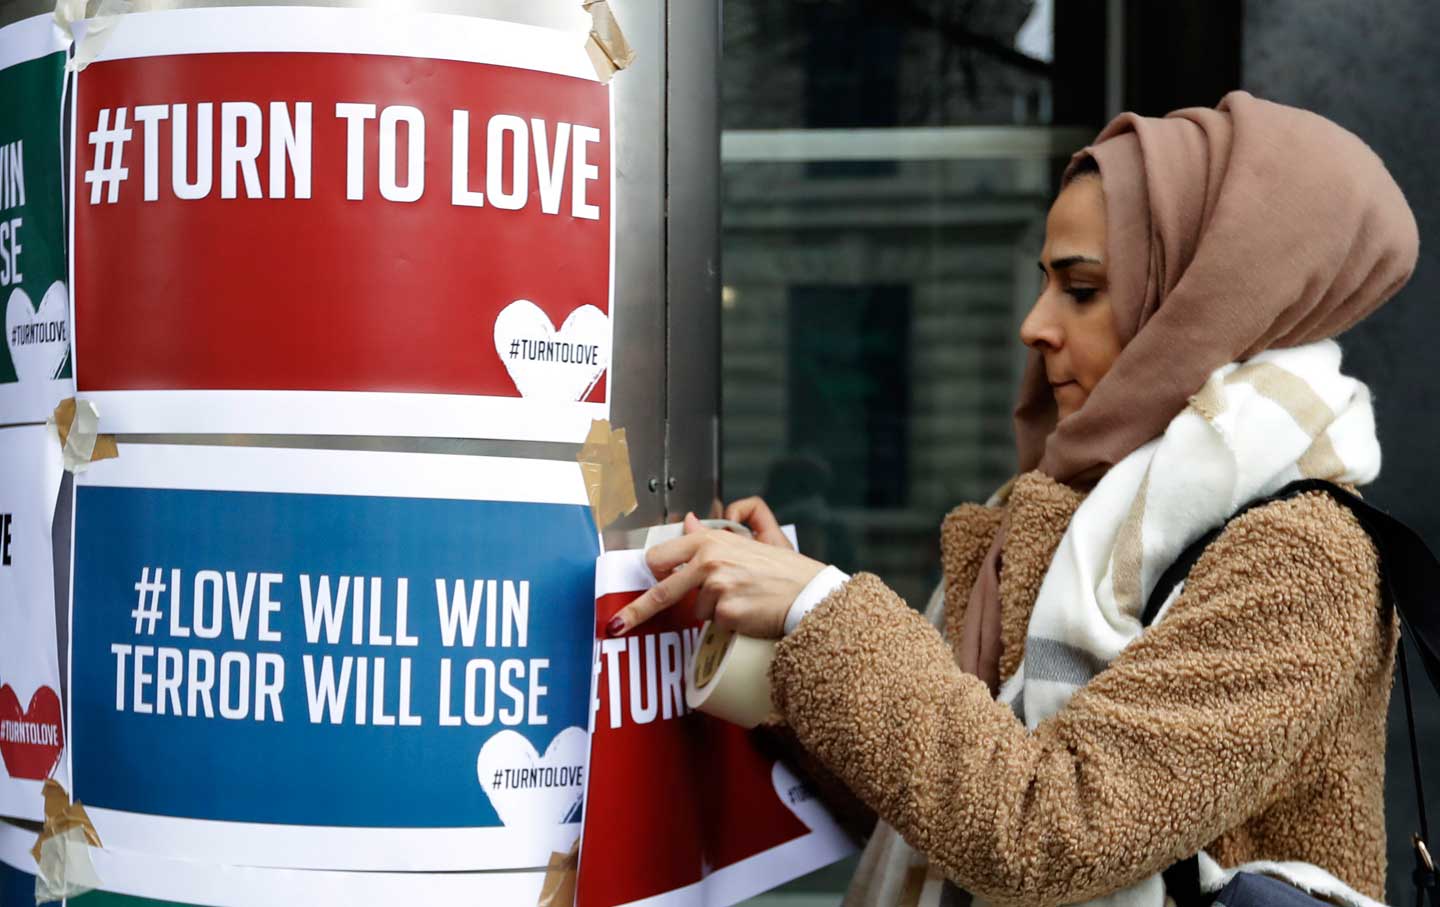 A demonstrator hangs banners from multi-faith group 'Turn to Love'